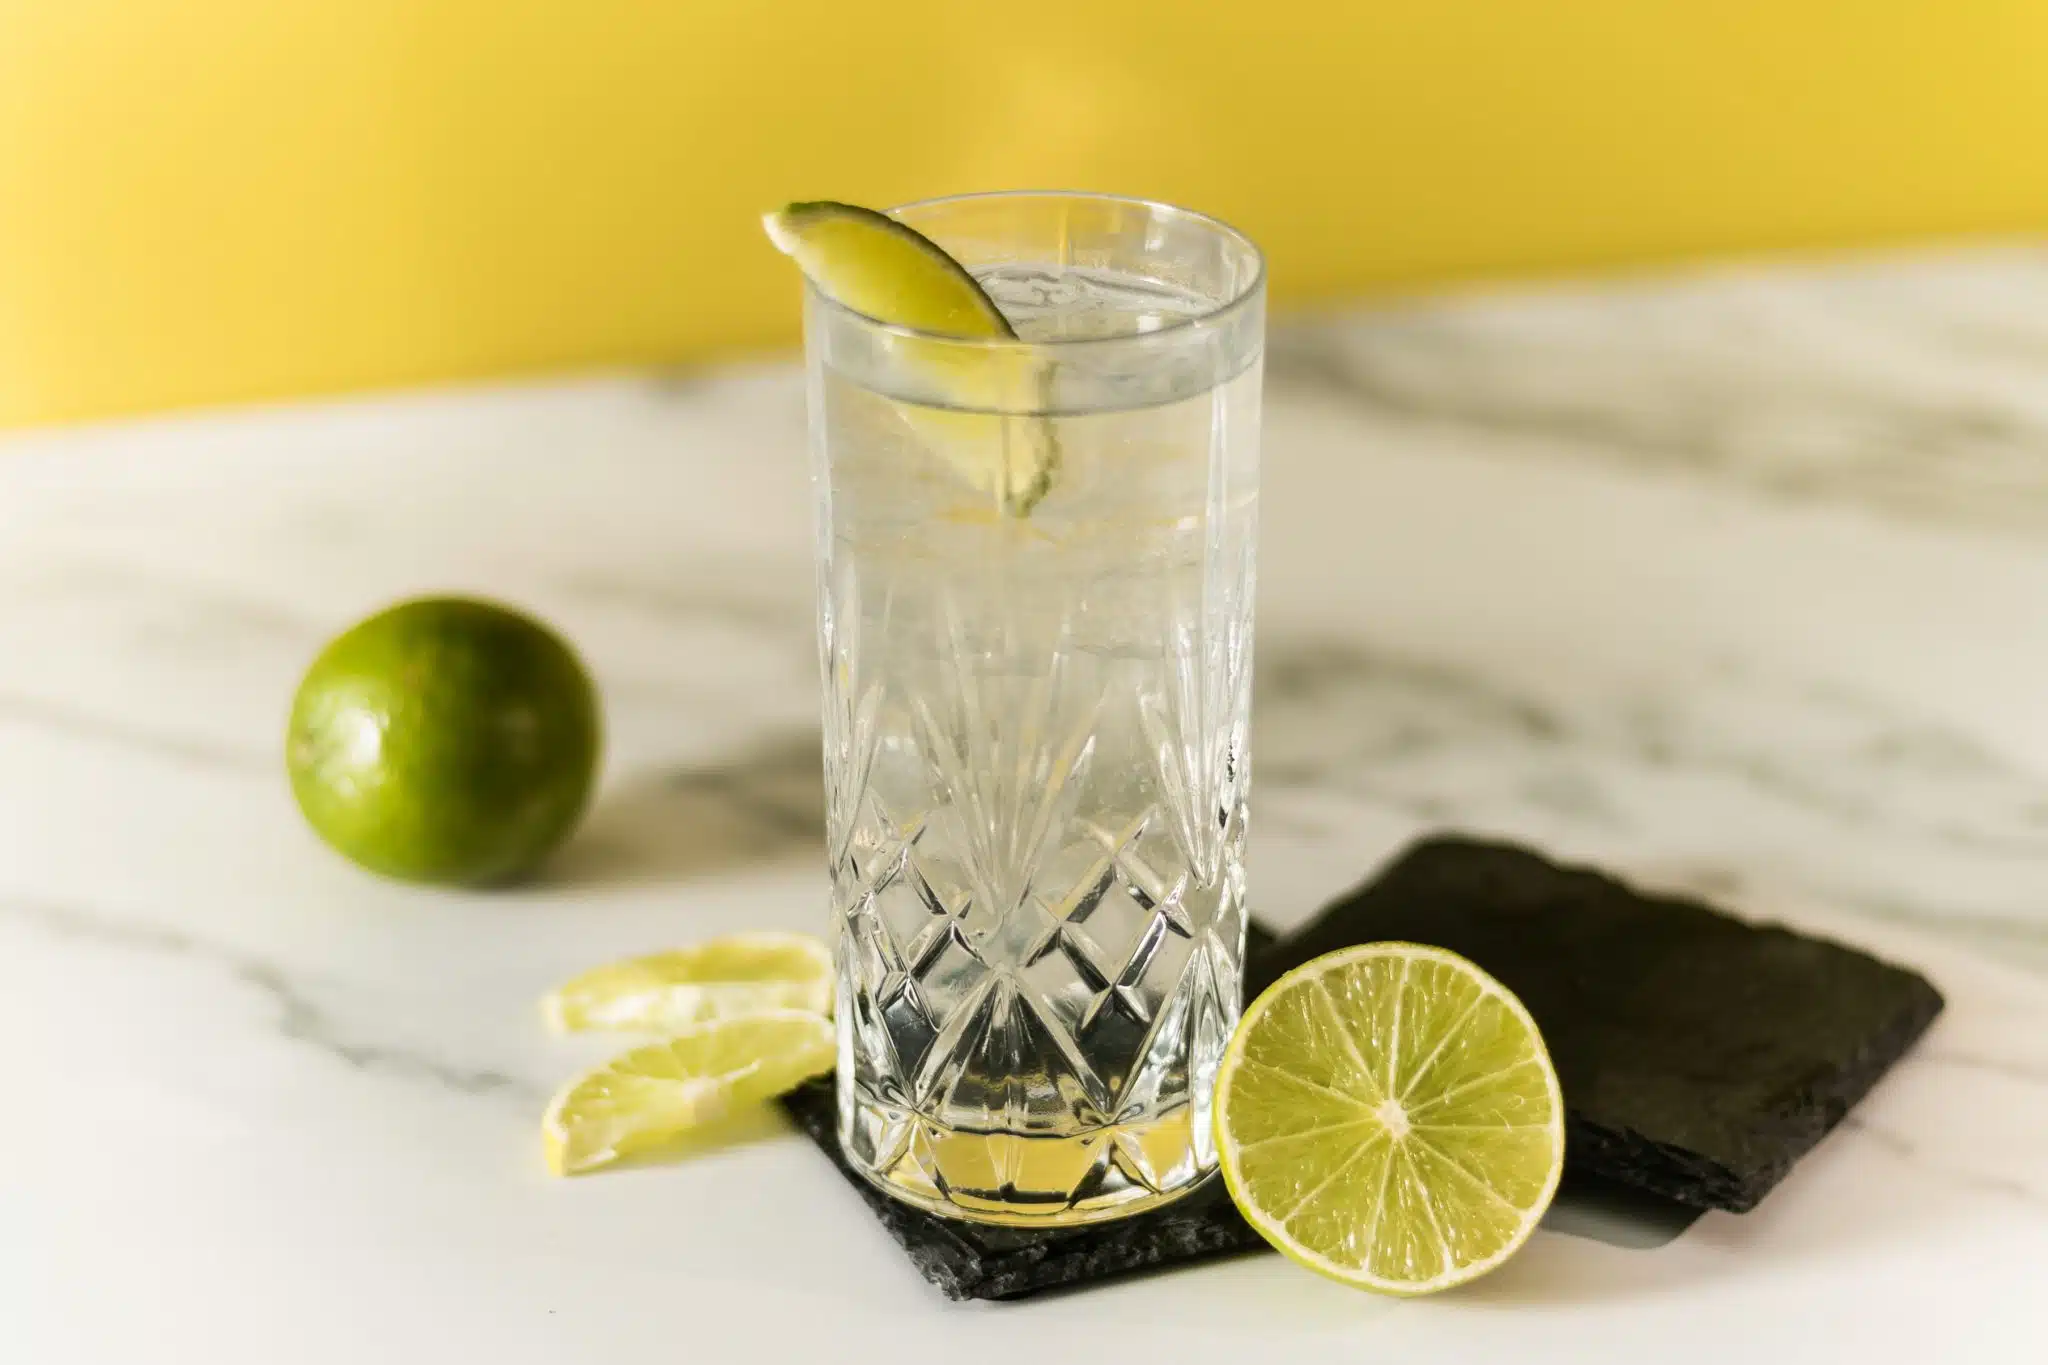 A side shot of a Vodka Tonic cocktail in highball glass on a black stone coaster with lime pieces around, placed on a white marmol table in front of a yellow wall.